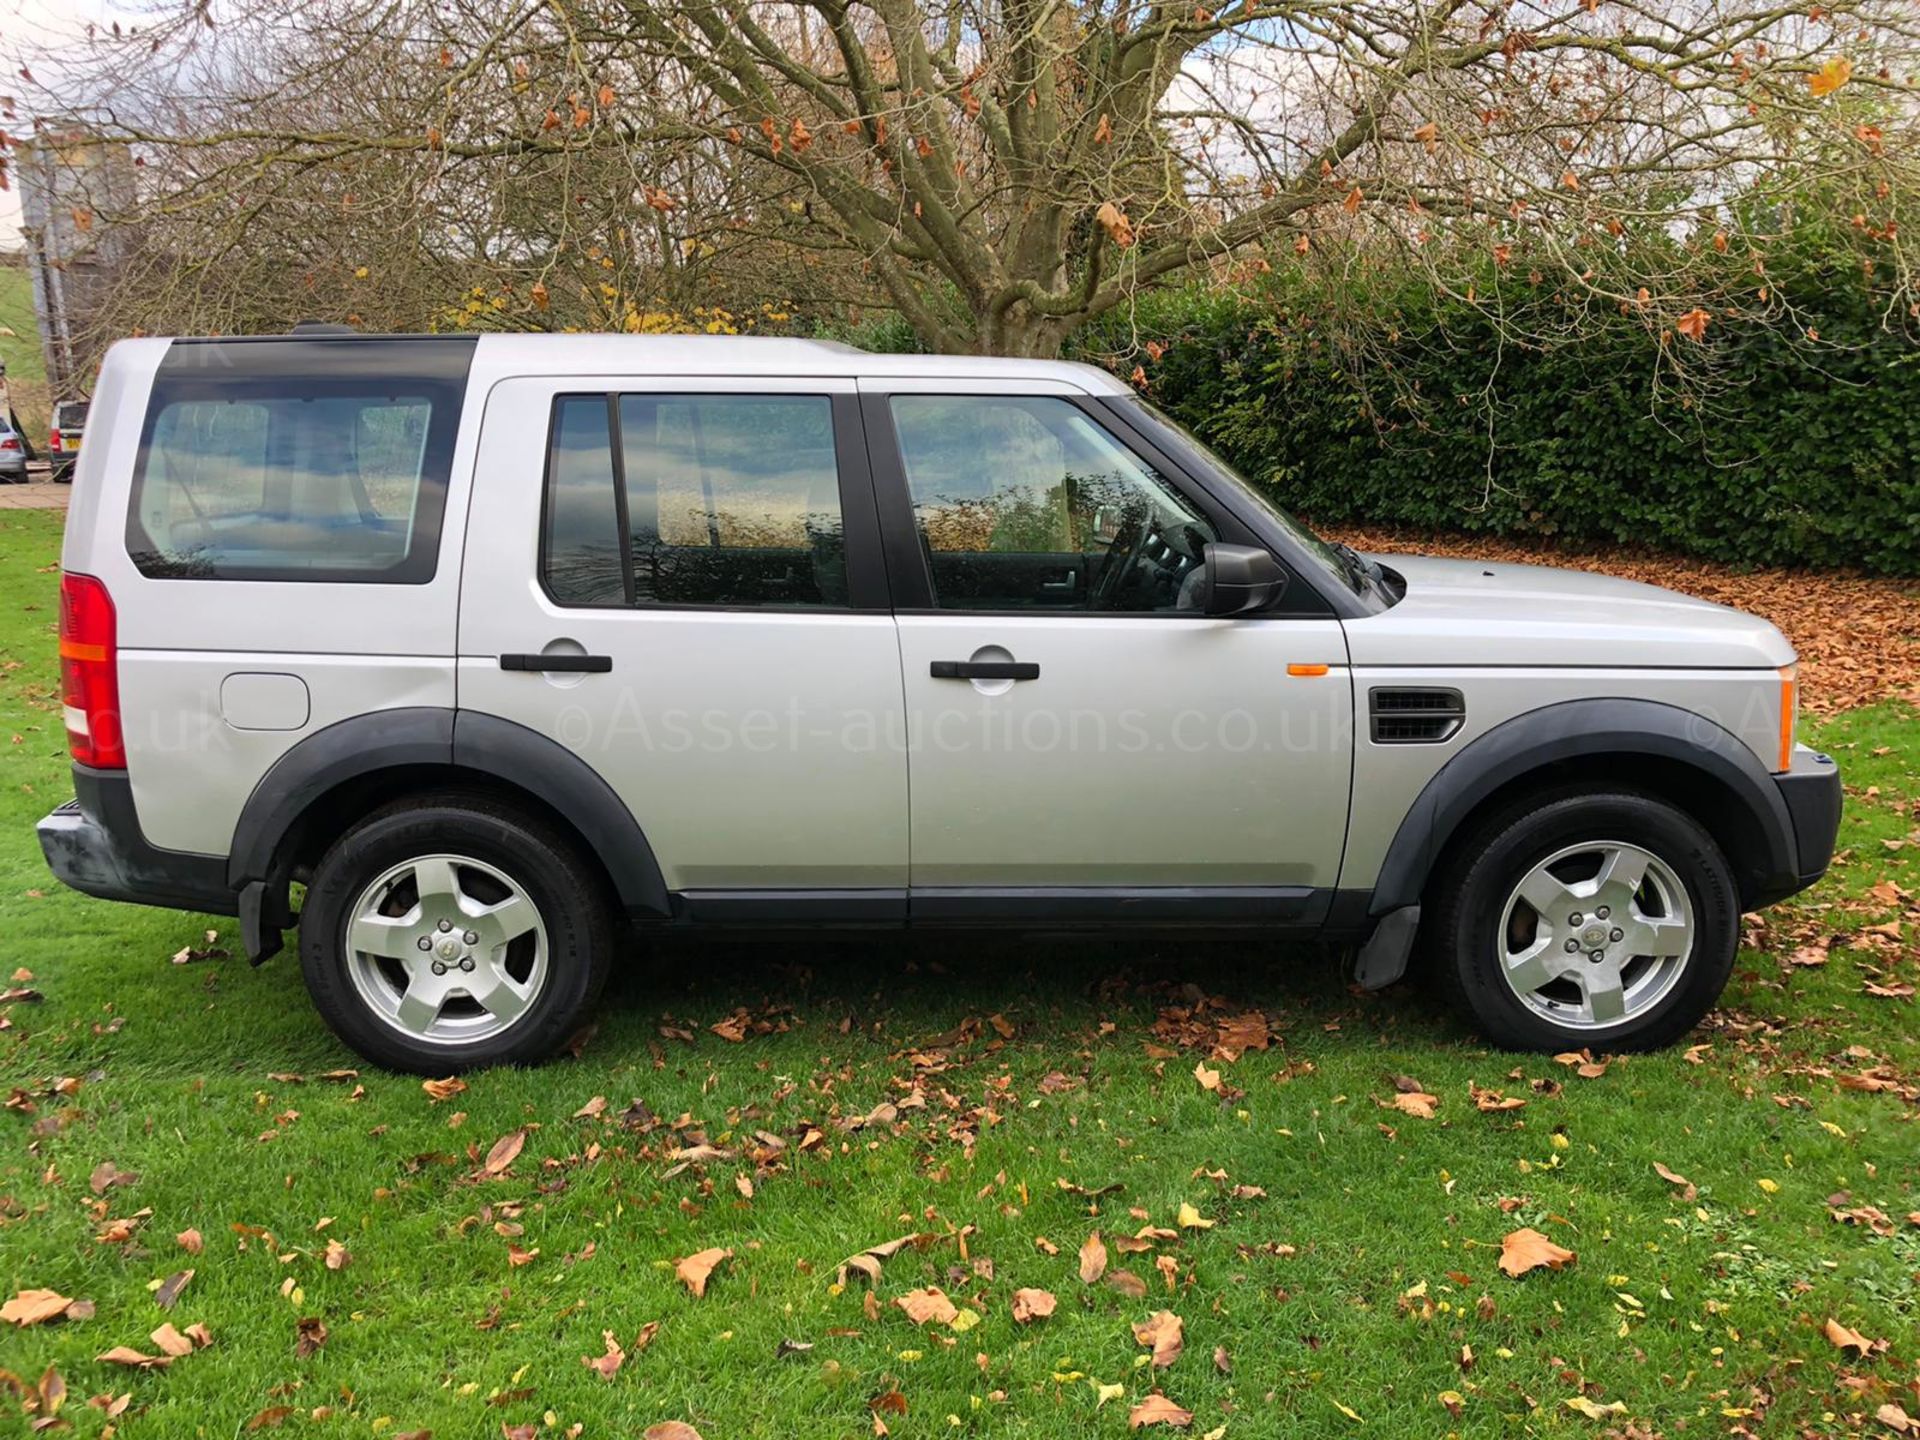 2005 LAND ROVER DISCOVERY 3 TDV6 S AUTO SILVER ESTATE, 146,941 MILES *NO VAT* - Image 8 of 17